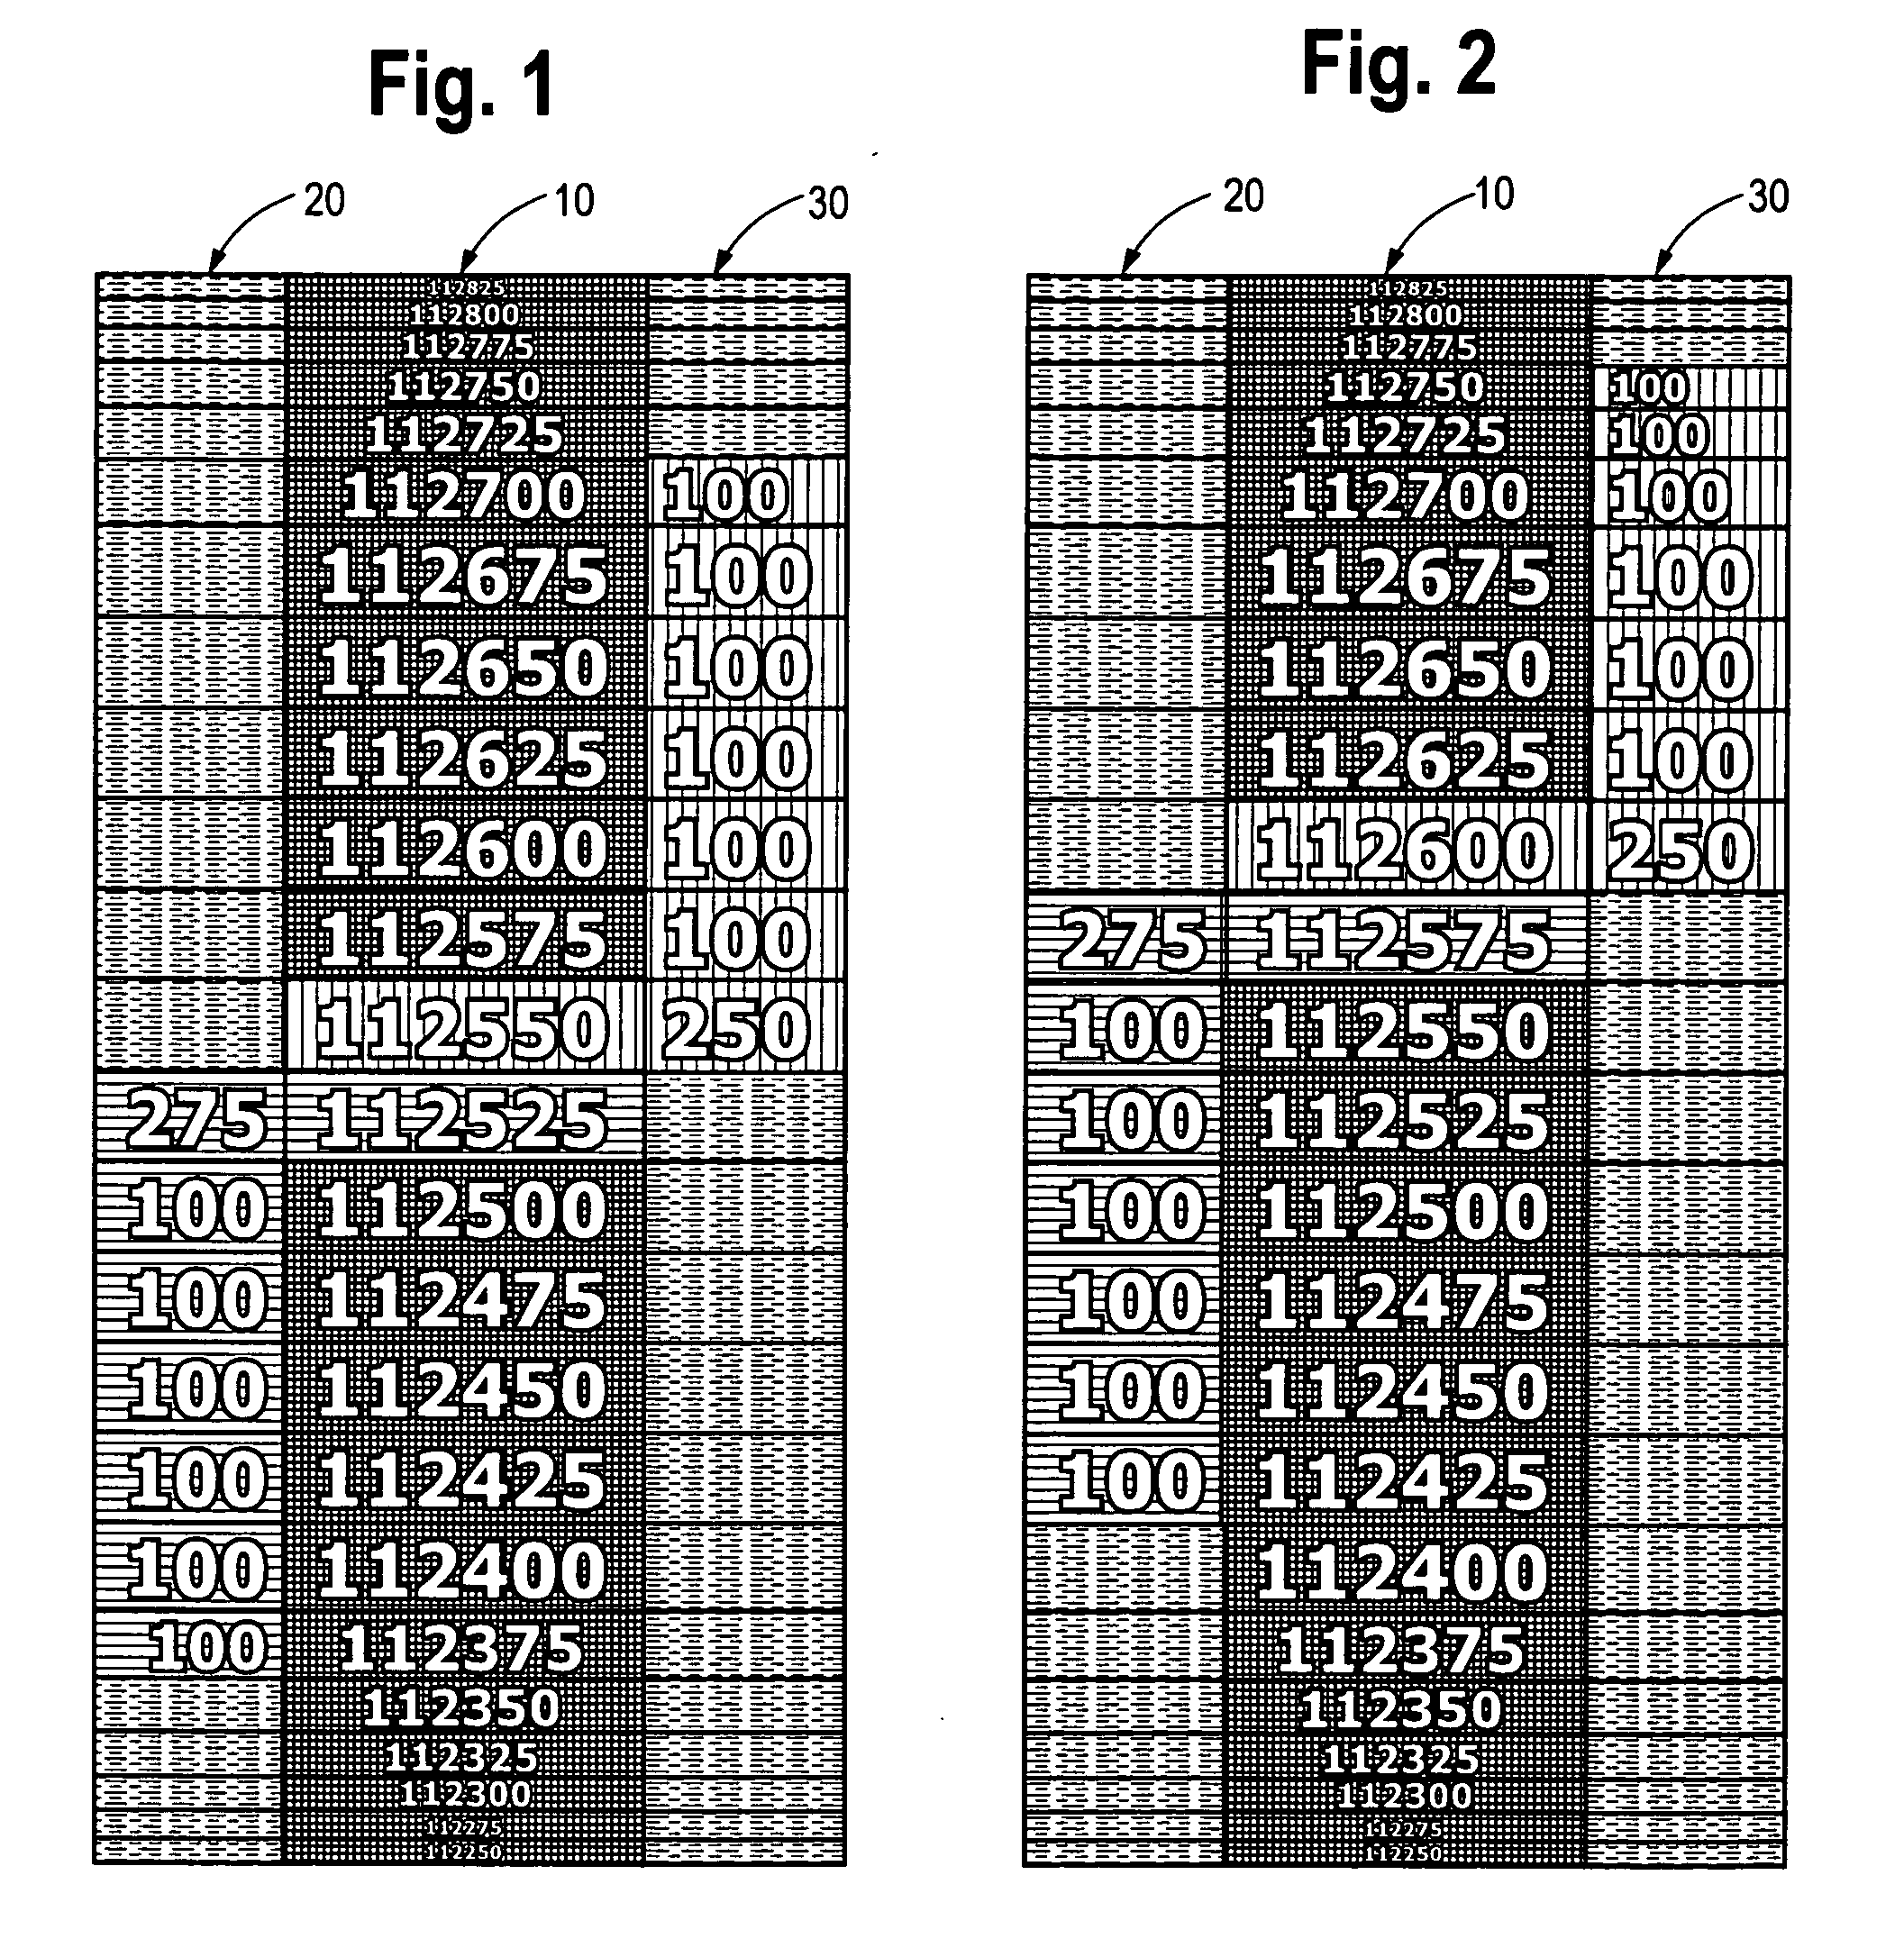 Graphical user interface and method for displaying market data and entering trading orders